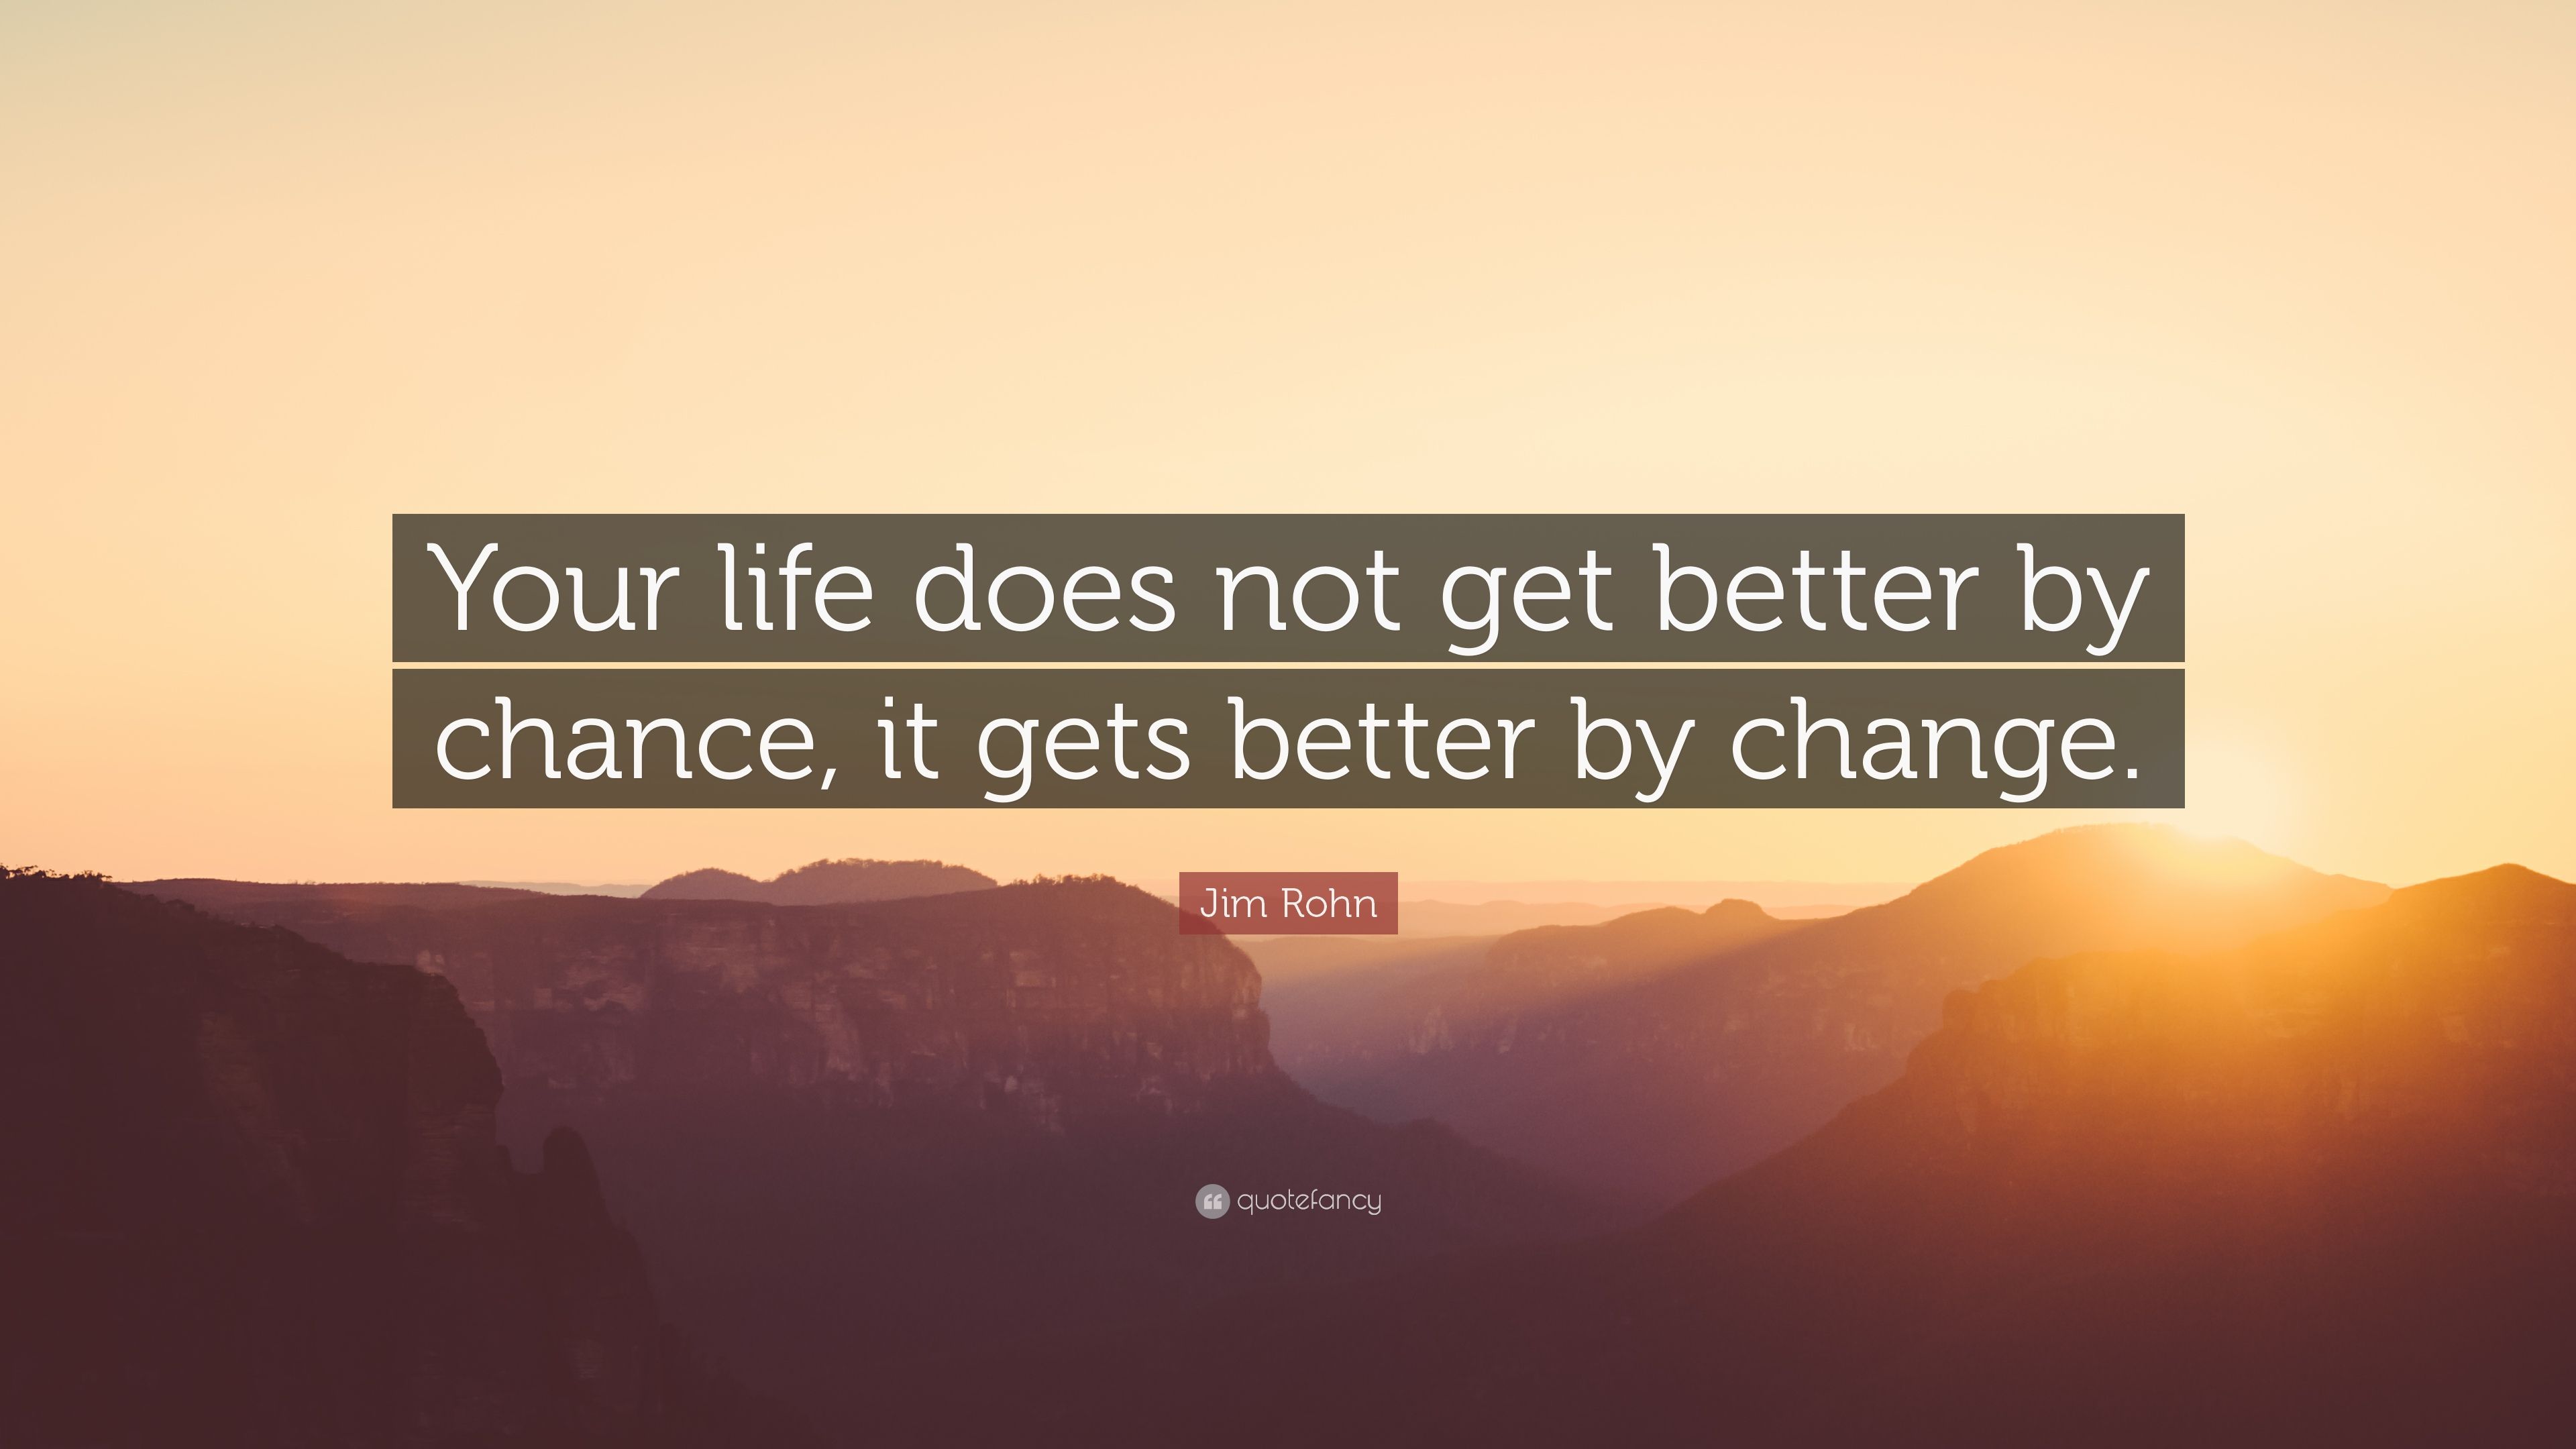 Jim Rohn Quote: “Your life does not get better by chance, it gets better by change.” (22 wallpaper)